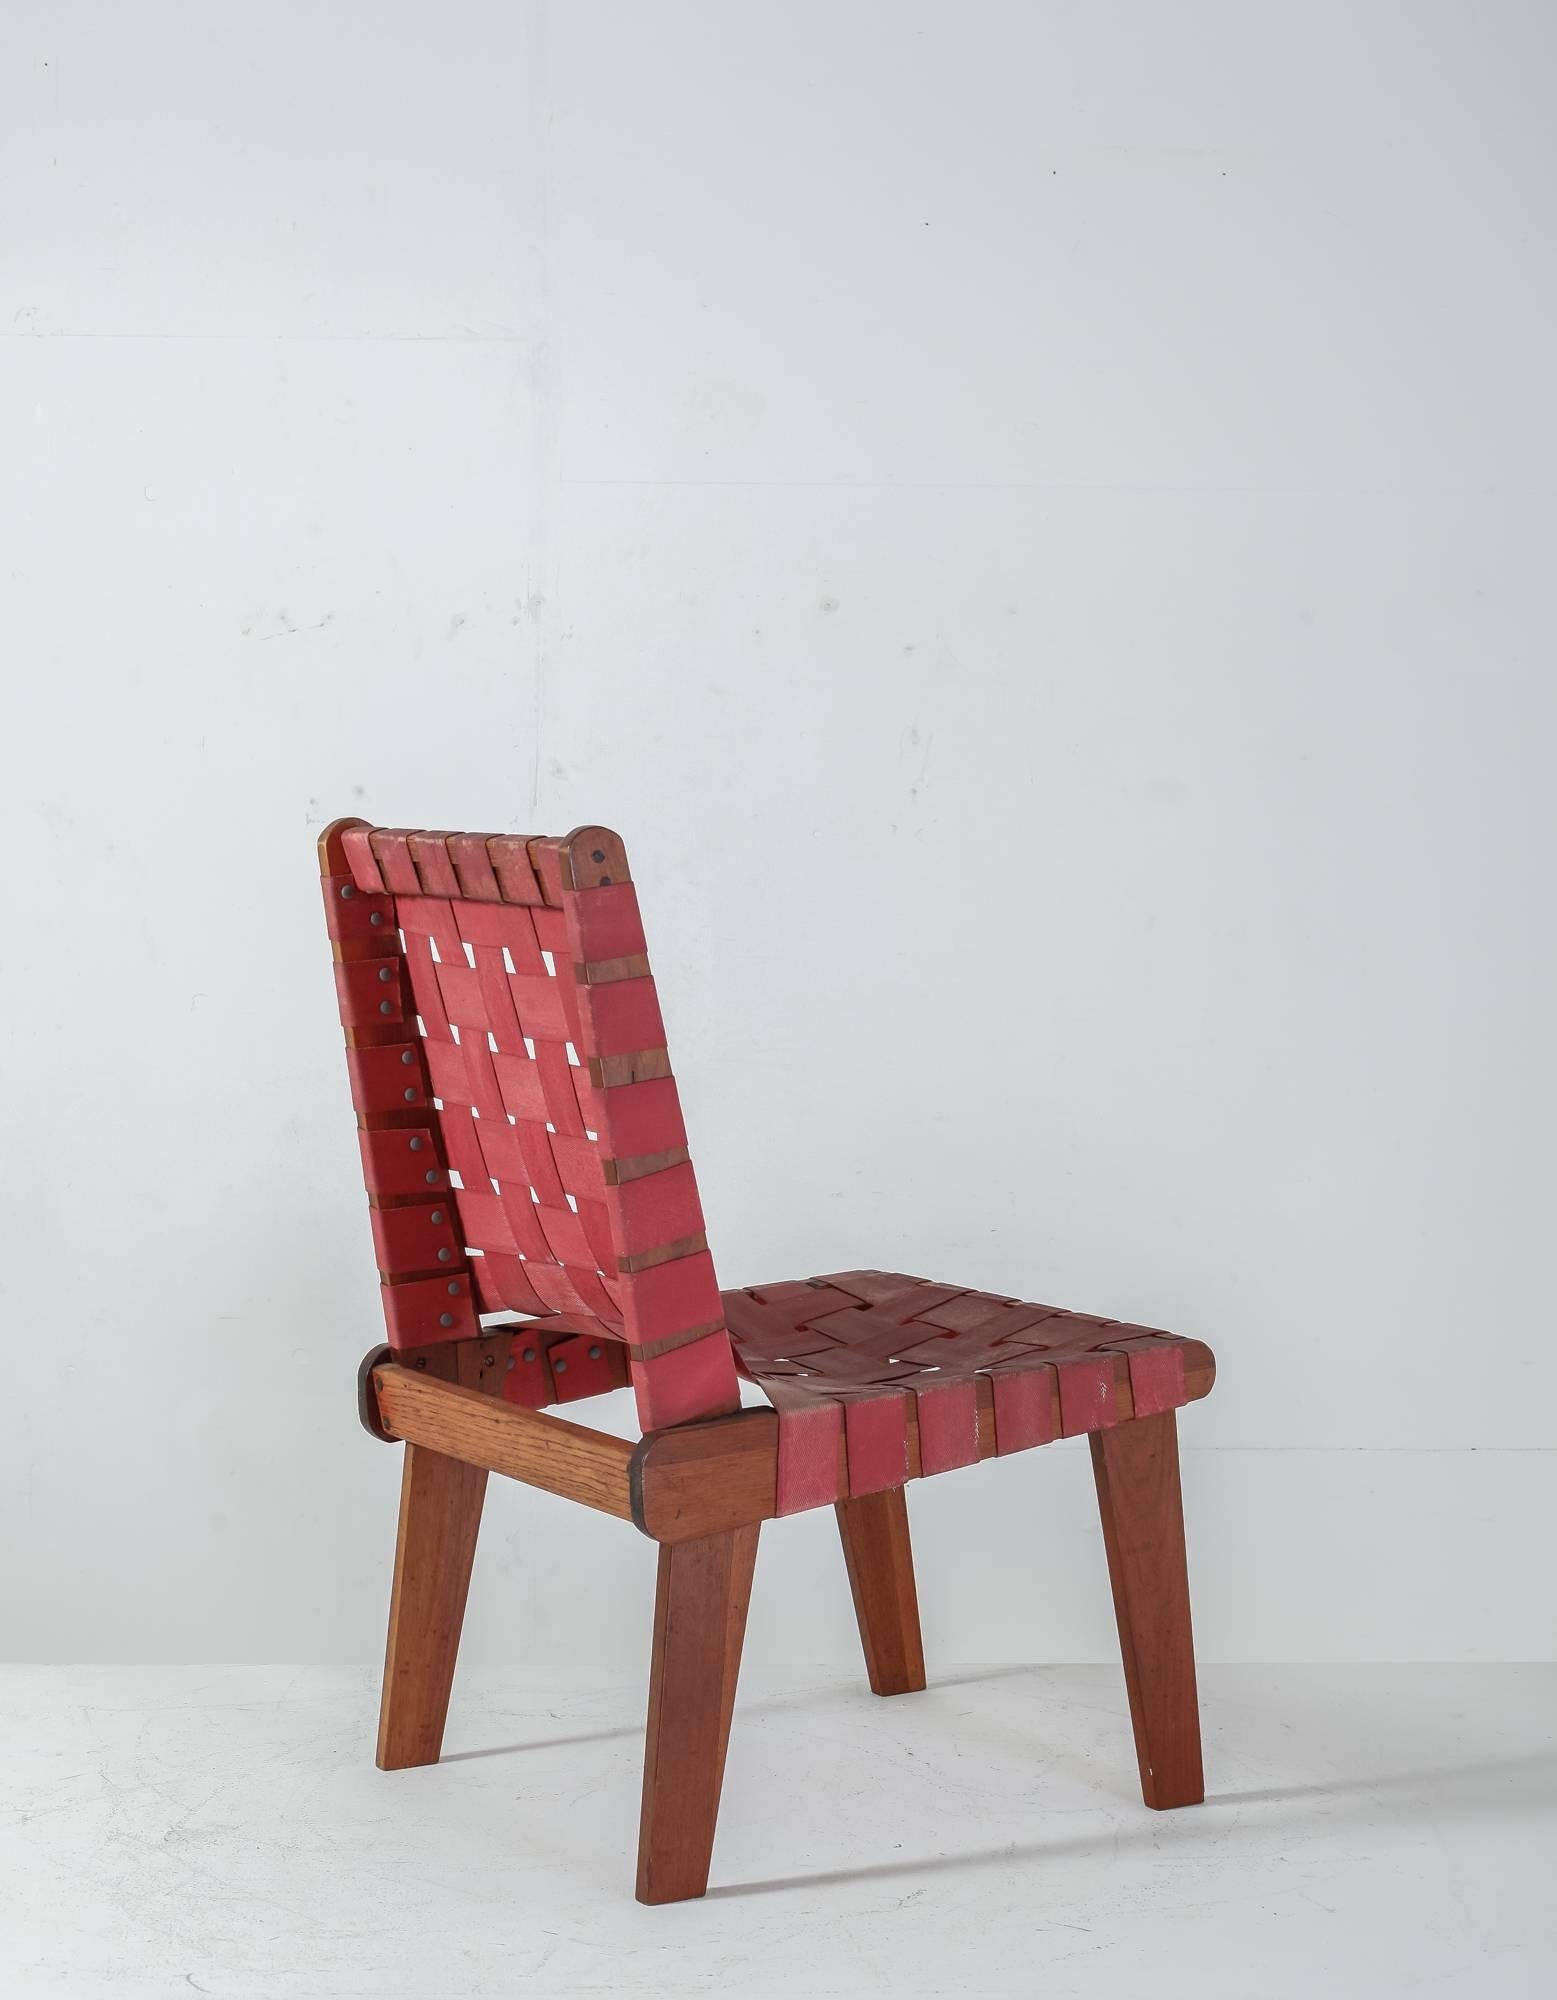 A minimal side chair with red webbed canvas seat and back reminiscent Klaus Grabe.

 